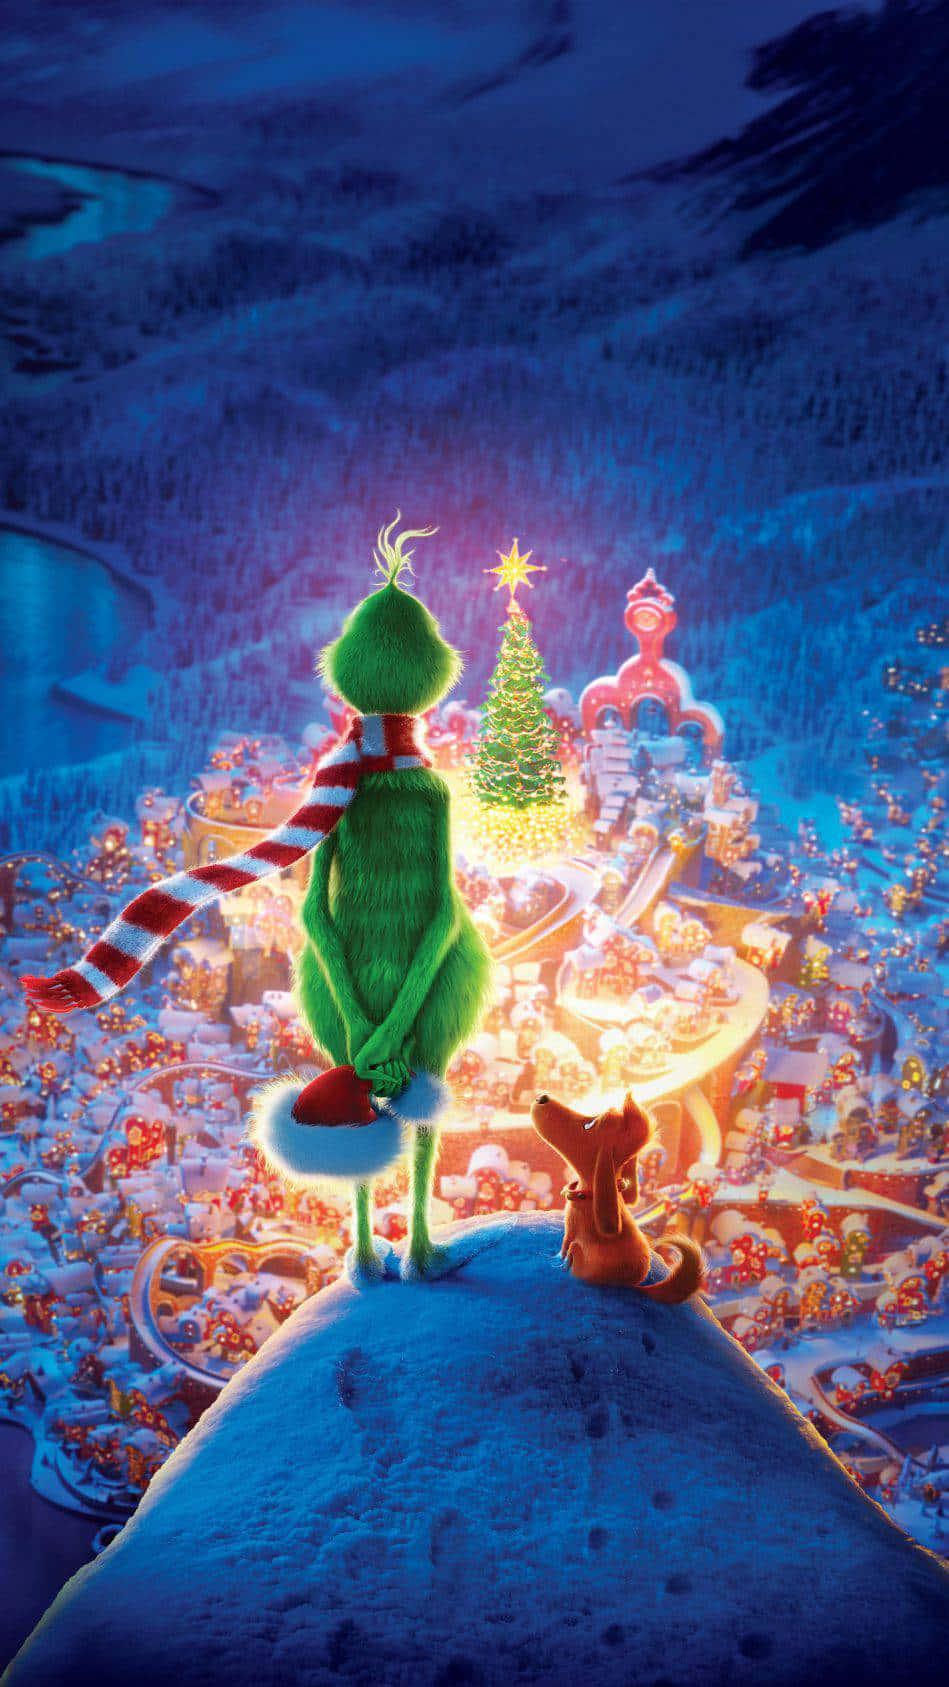 Download The Grinch Movie Poster Wallpaper